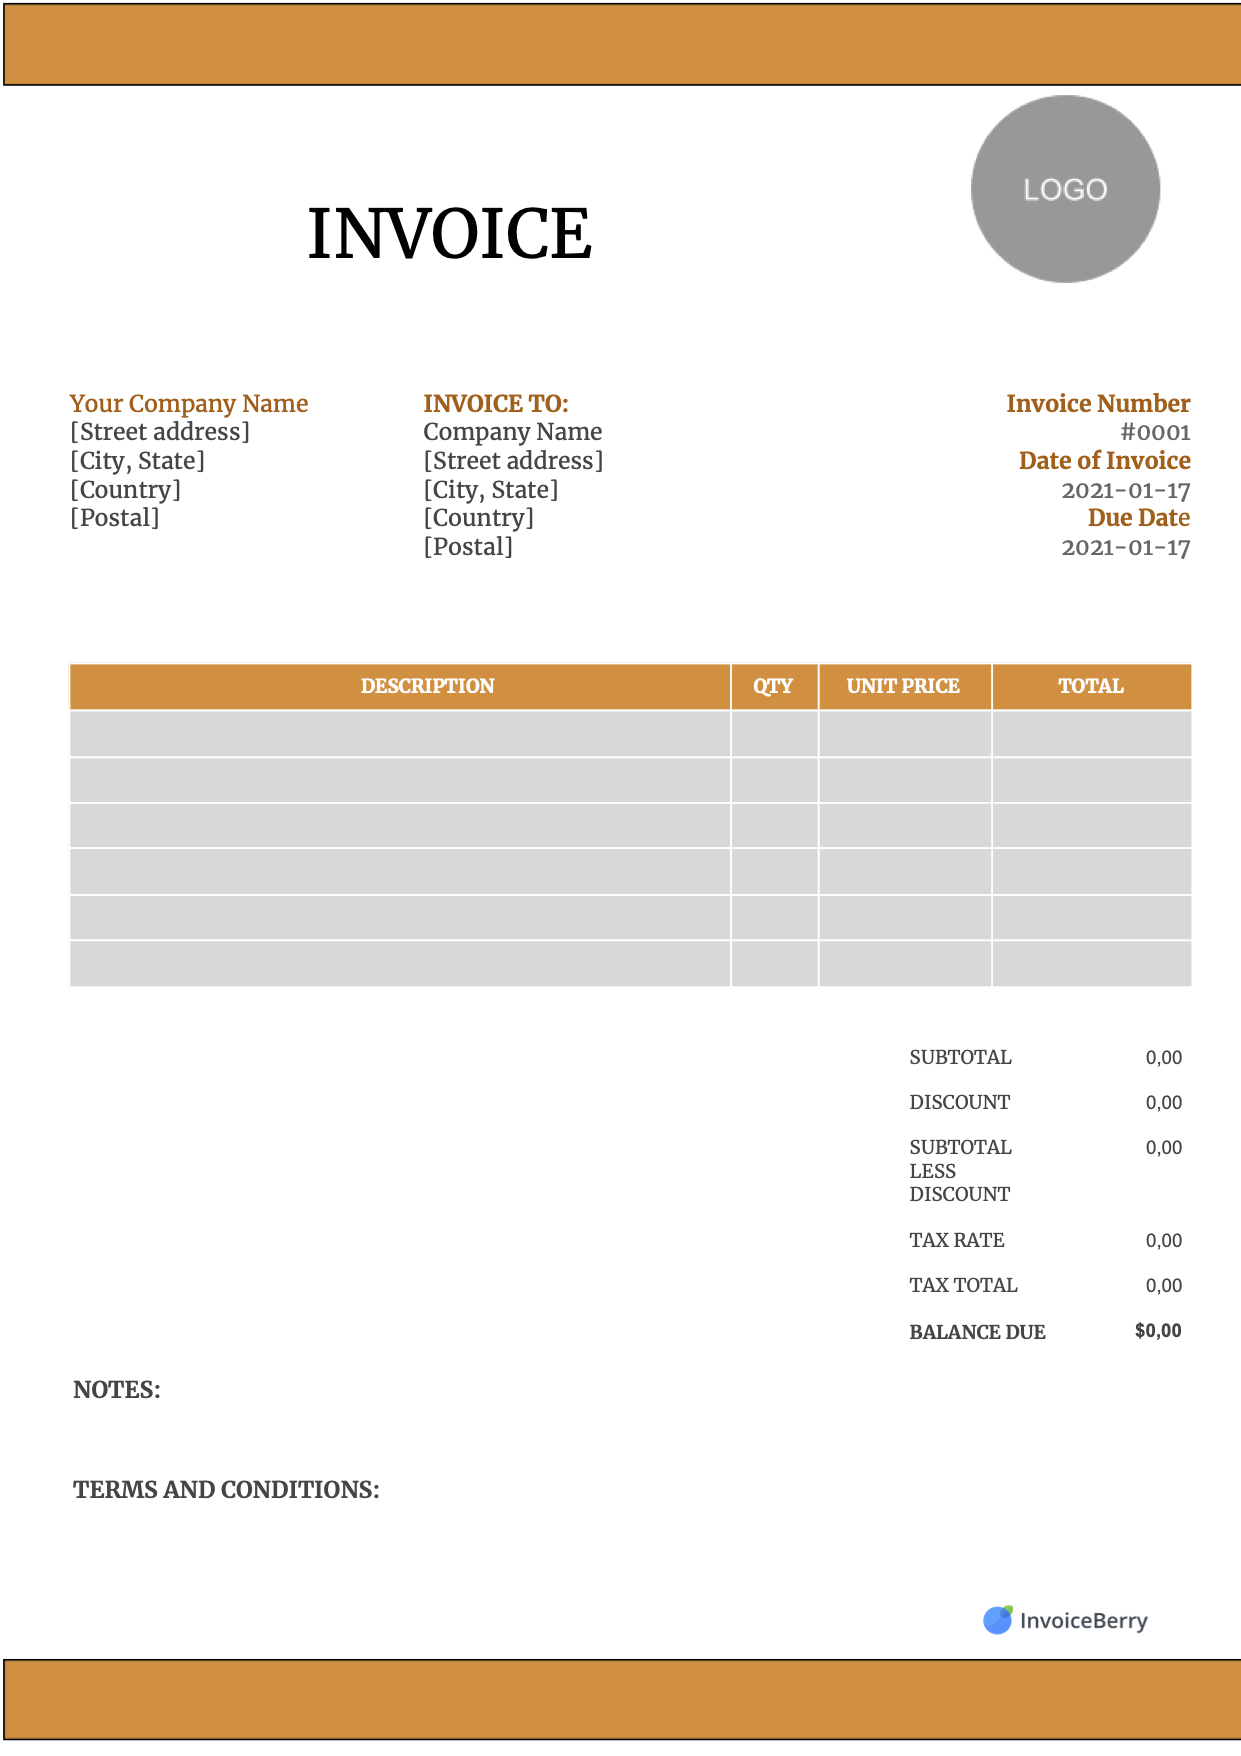 Free Invoice Templates Download All Formats and Industries InvoiceBerry